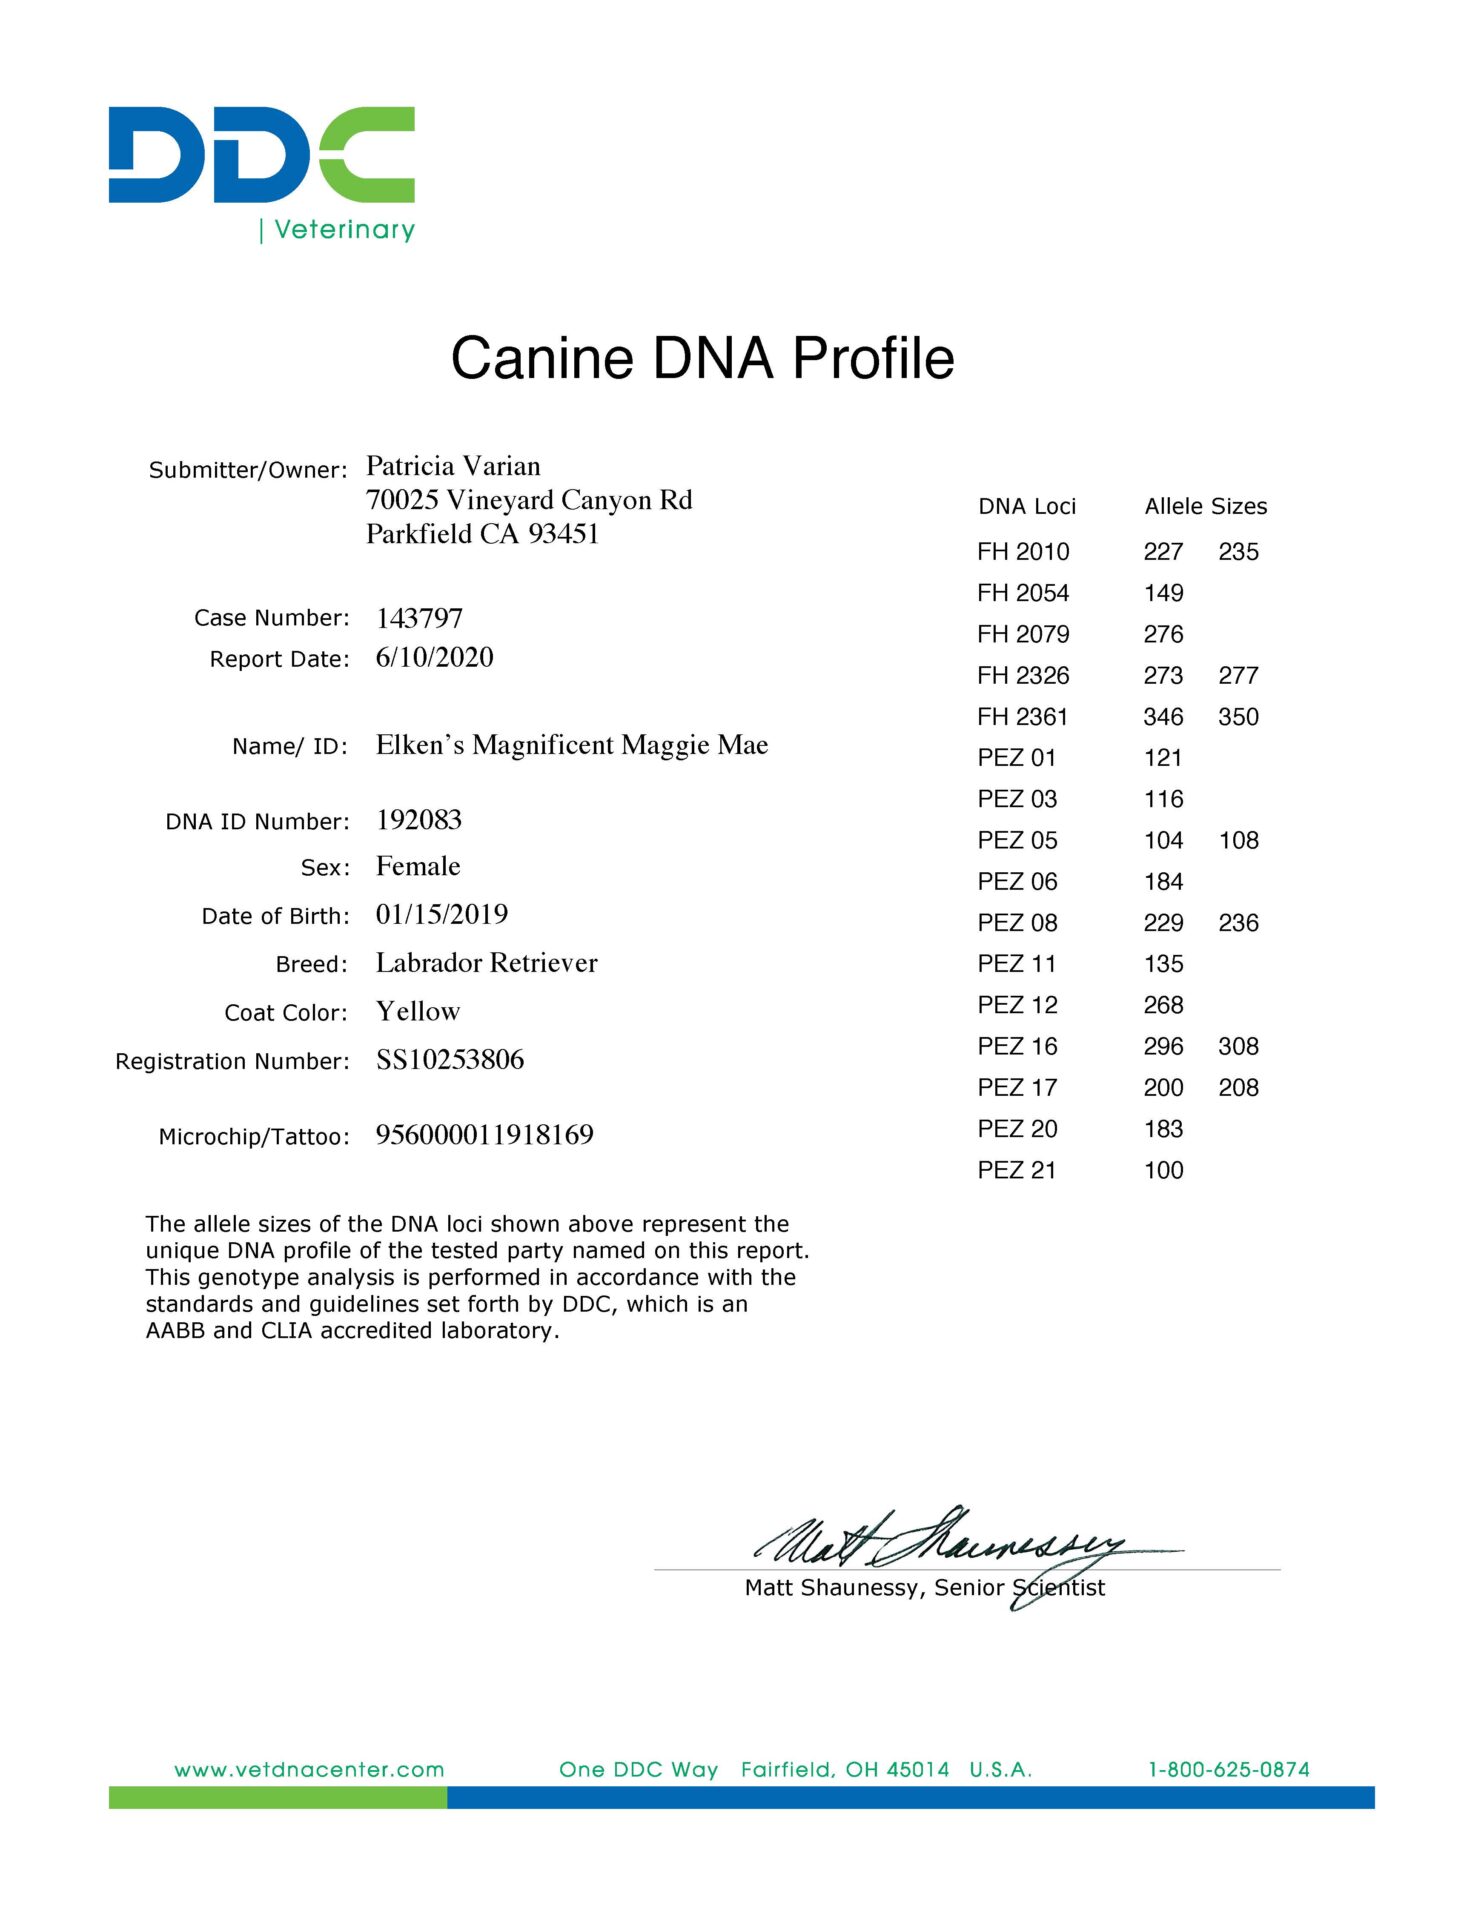 A picture of the carne dna profile.